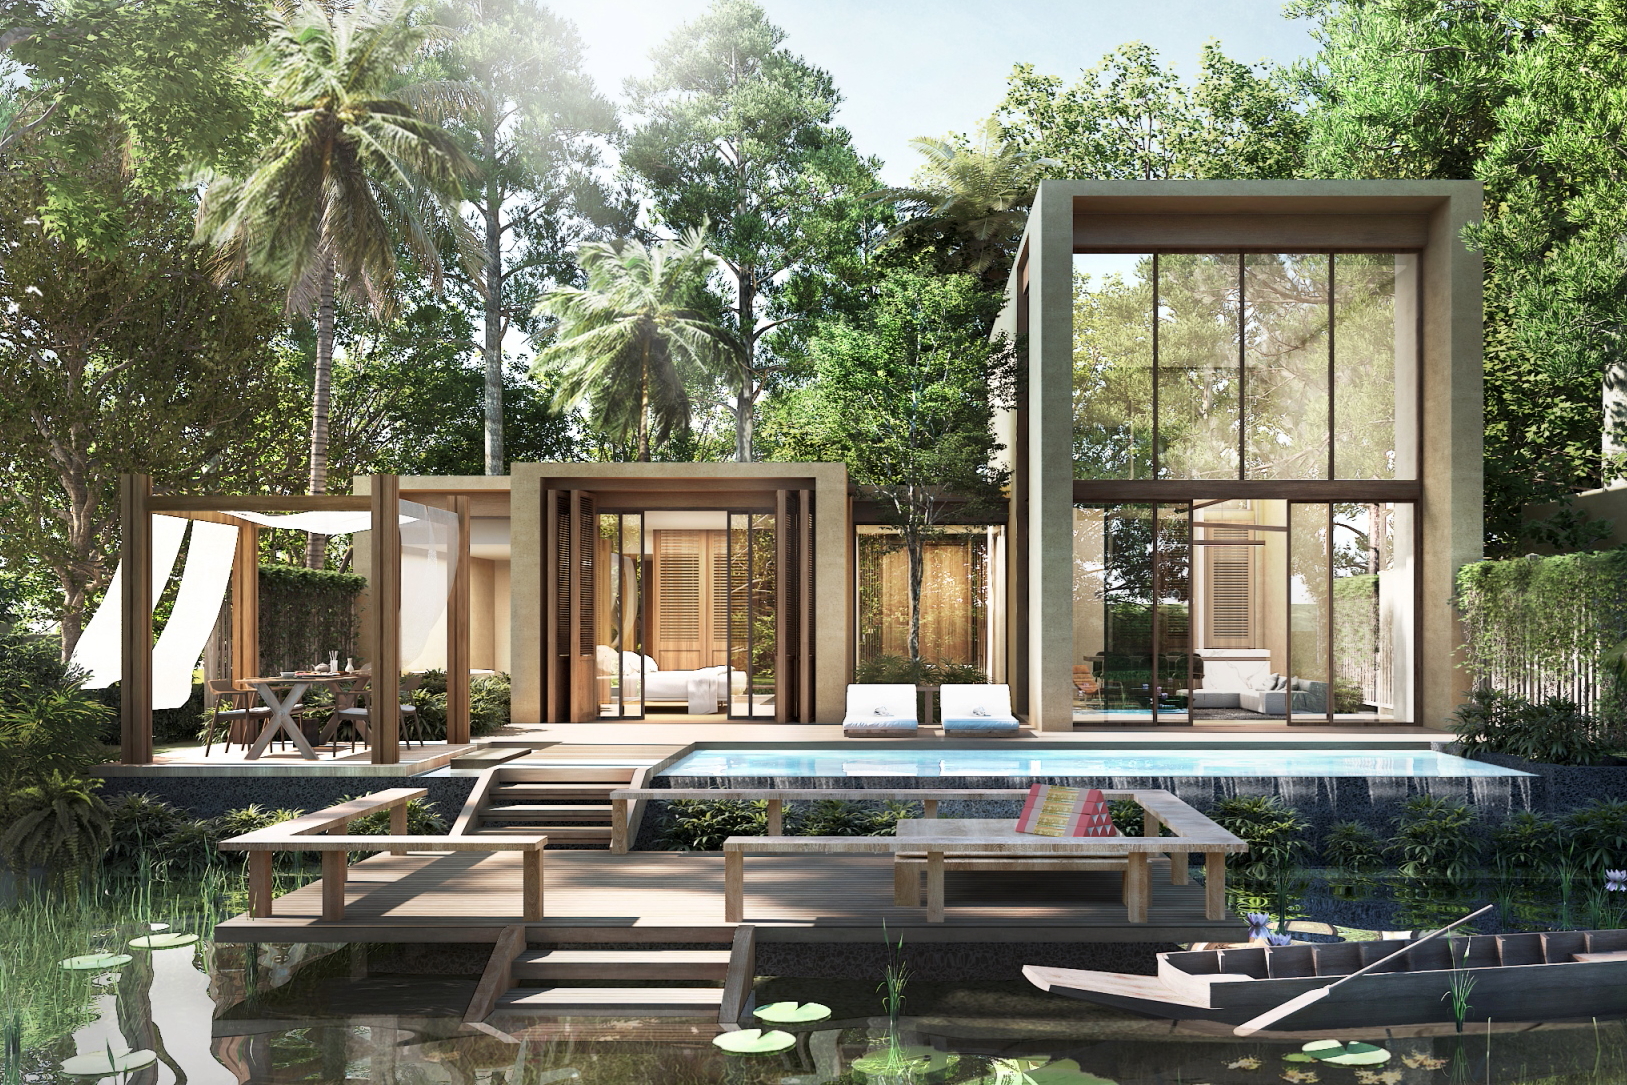 GHM has signed a management agreement with Aquarius International Development (AQI) to operate a stunning 200-key resort on Koh Chang, the third largest island in the Kingdom of Thailand. Click to enlarge.